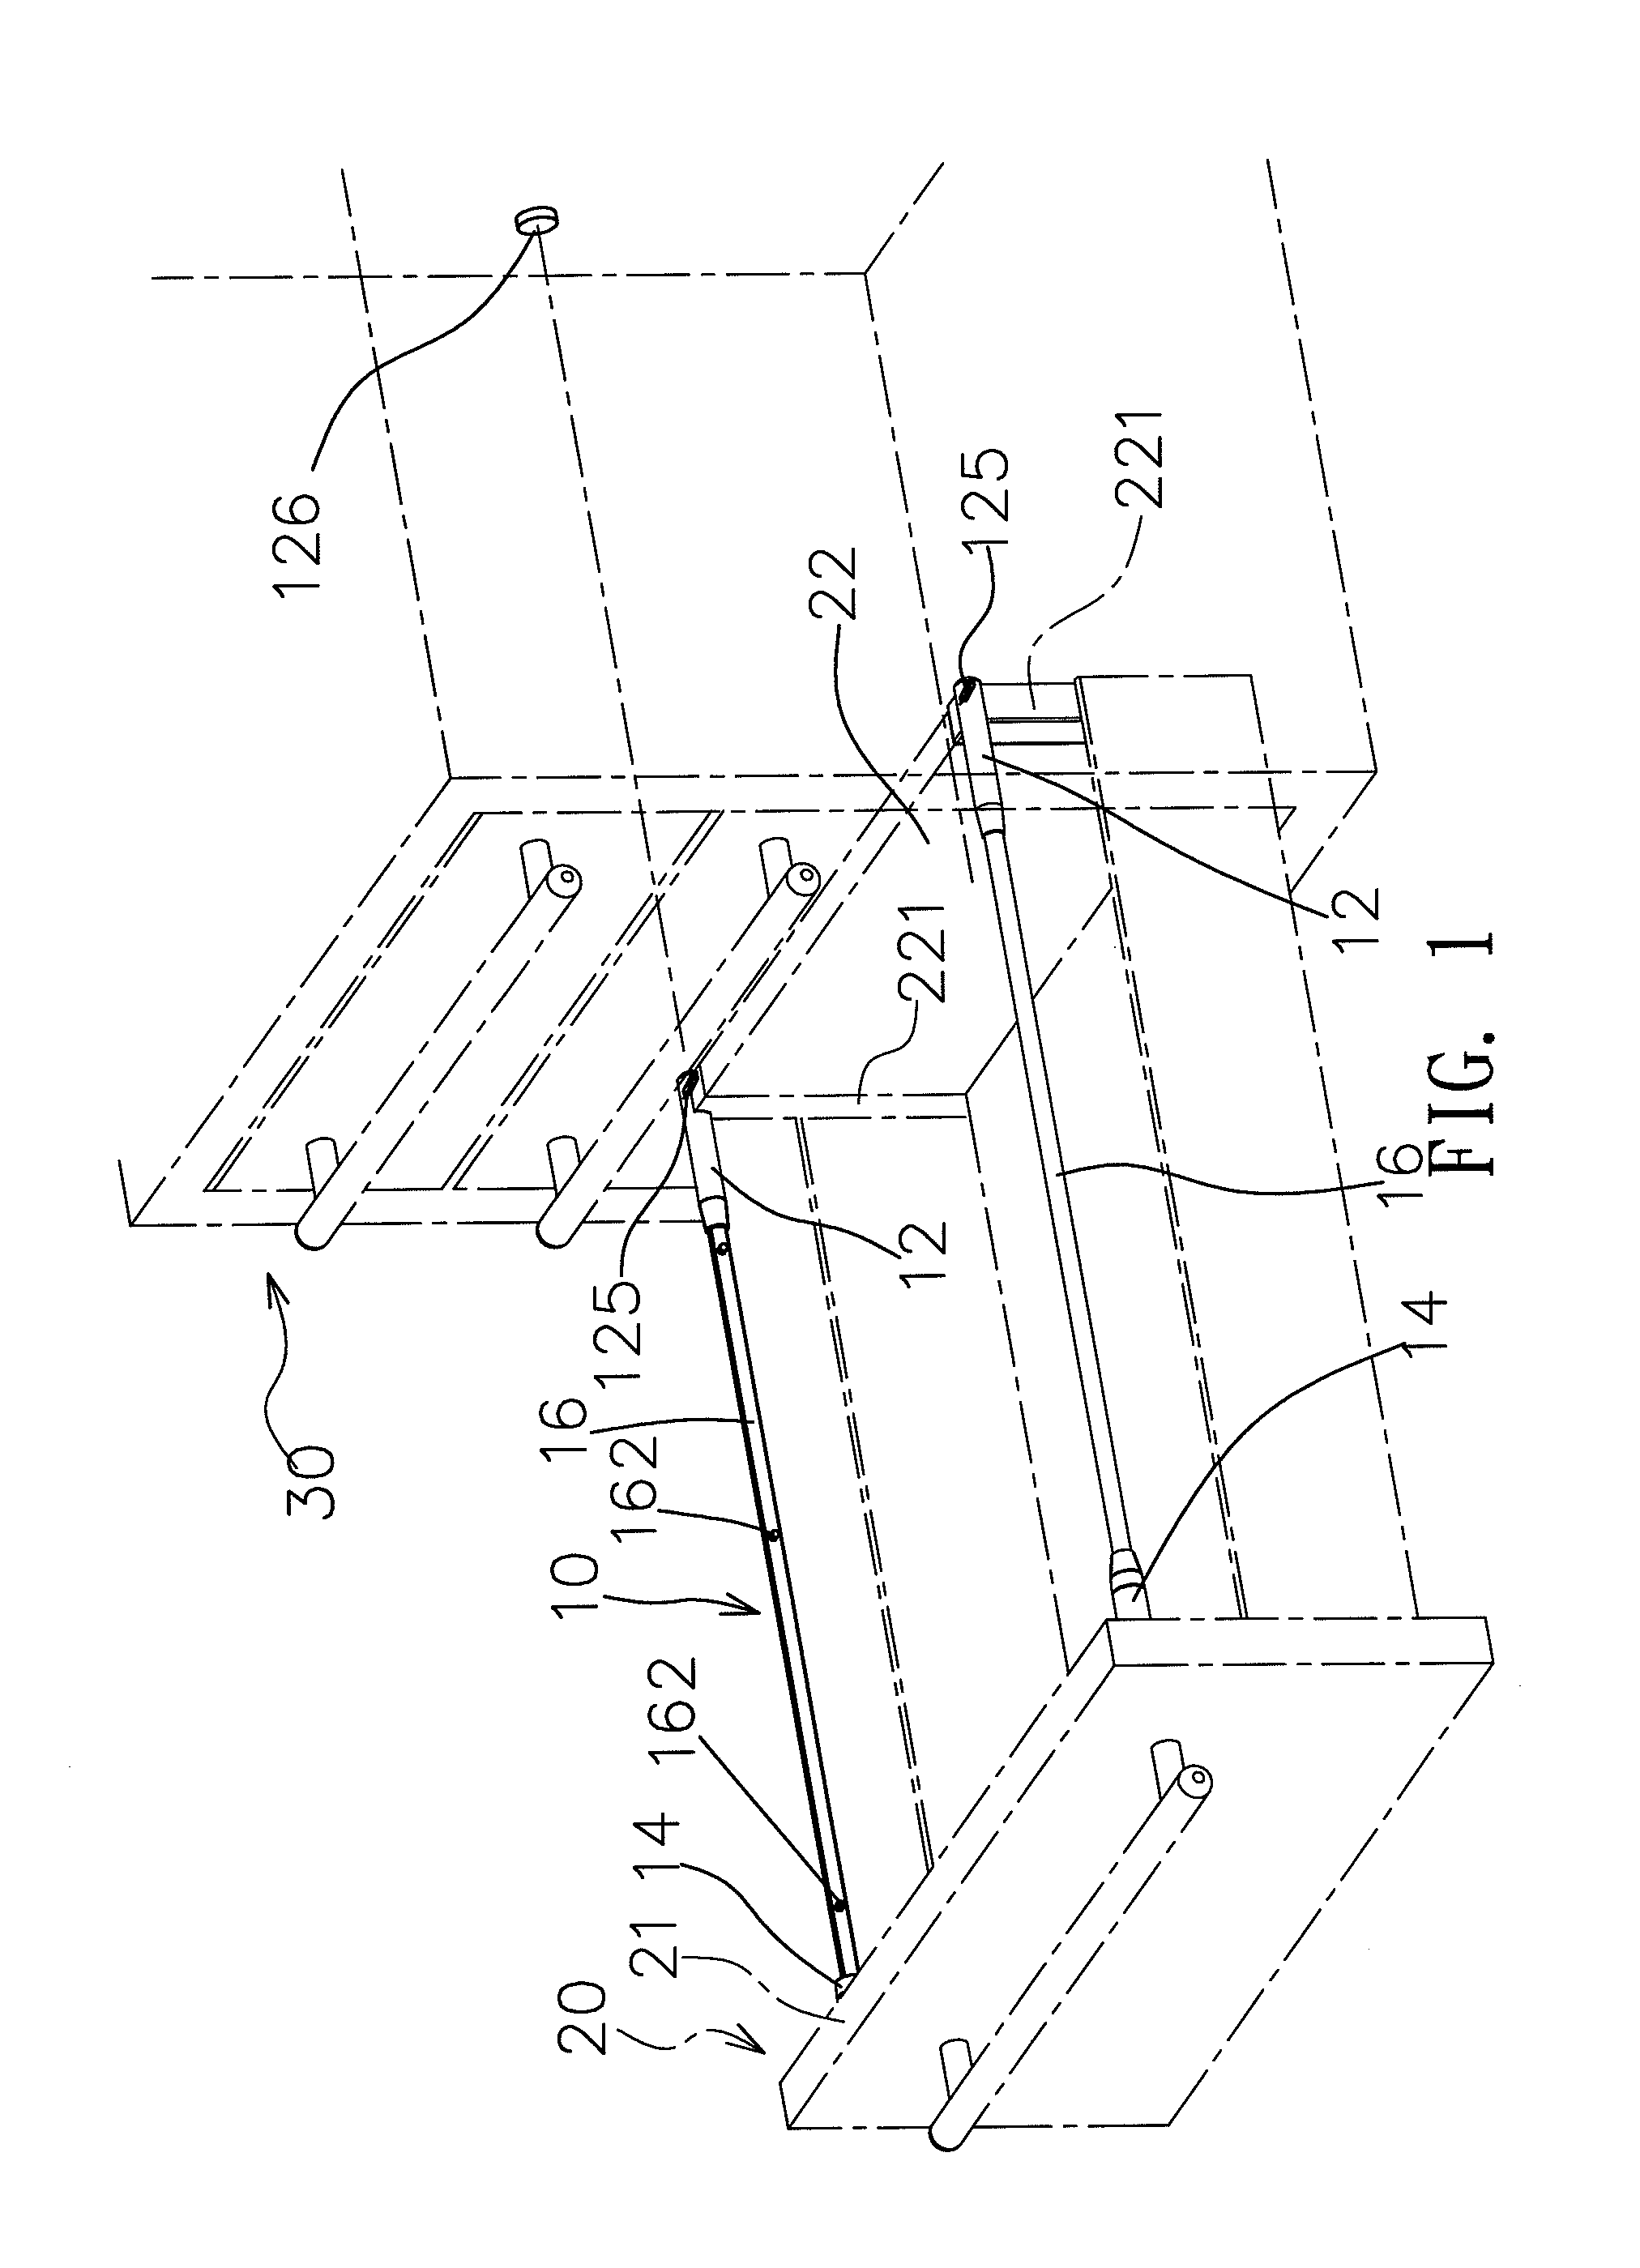 Illumination device controlled by magnetic reed module in cabinet